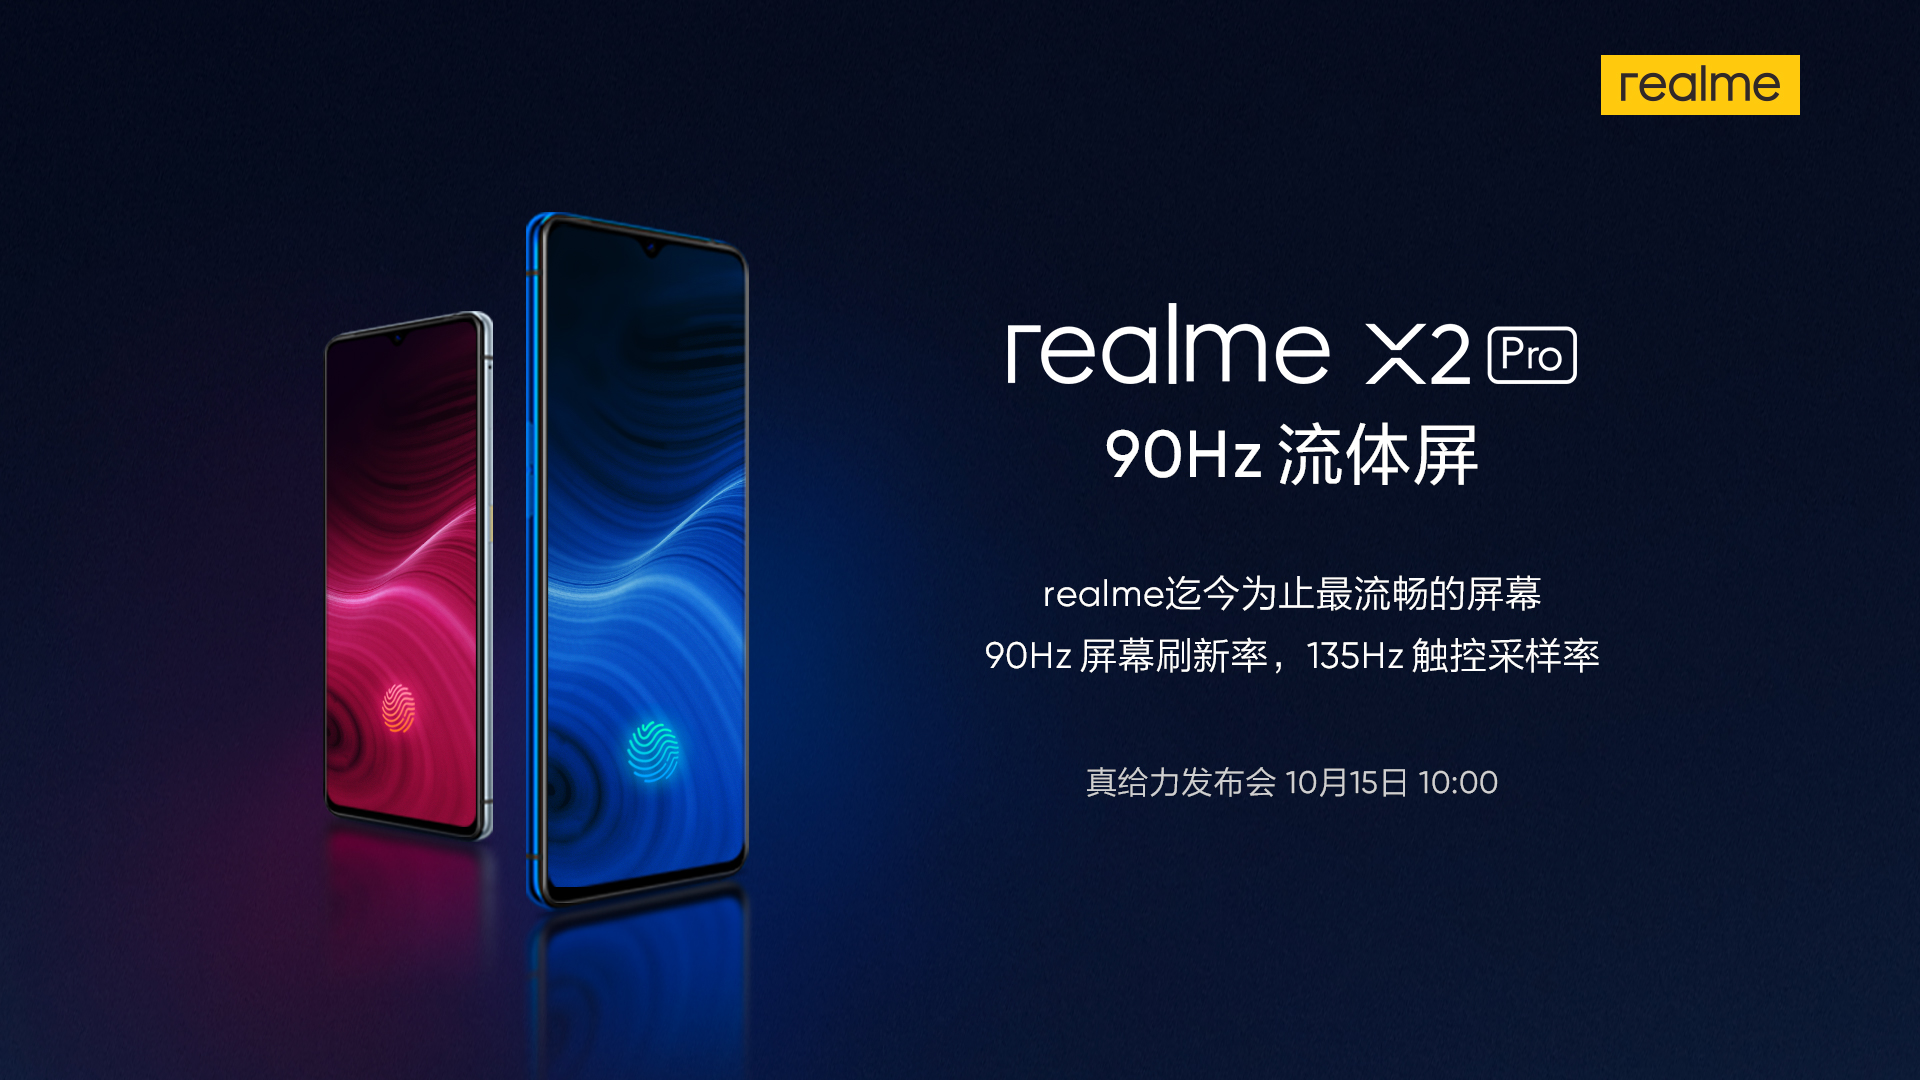 The Realme X2 Pro will come with a 135Hz touch-response rate